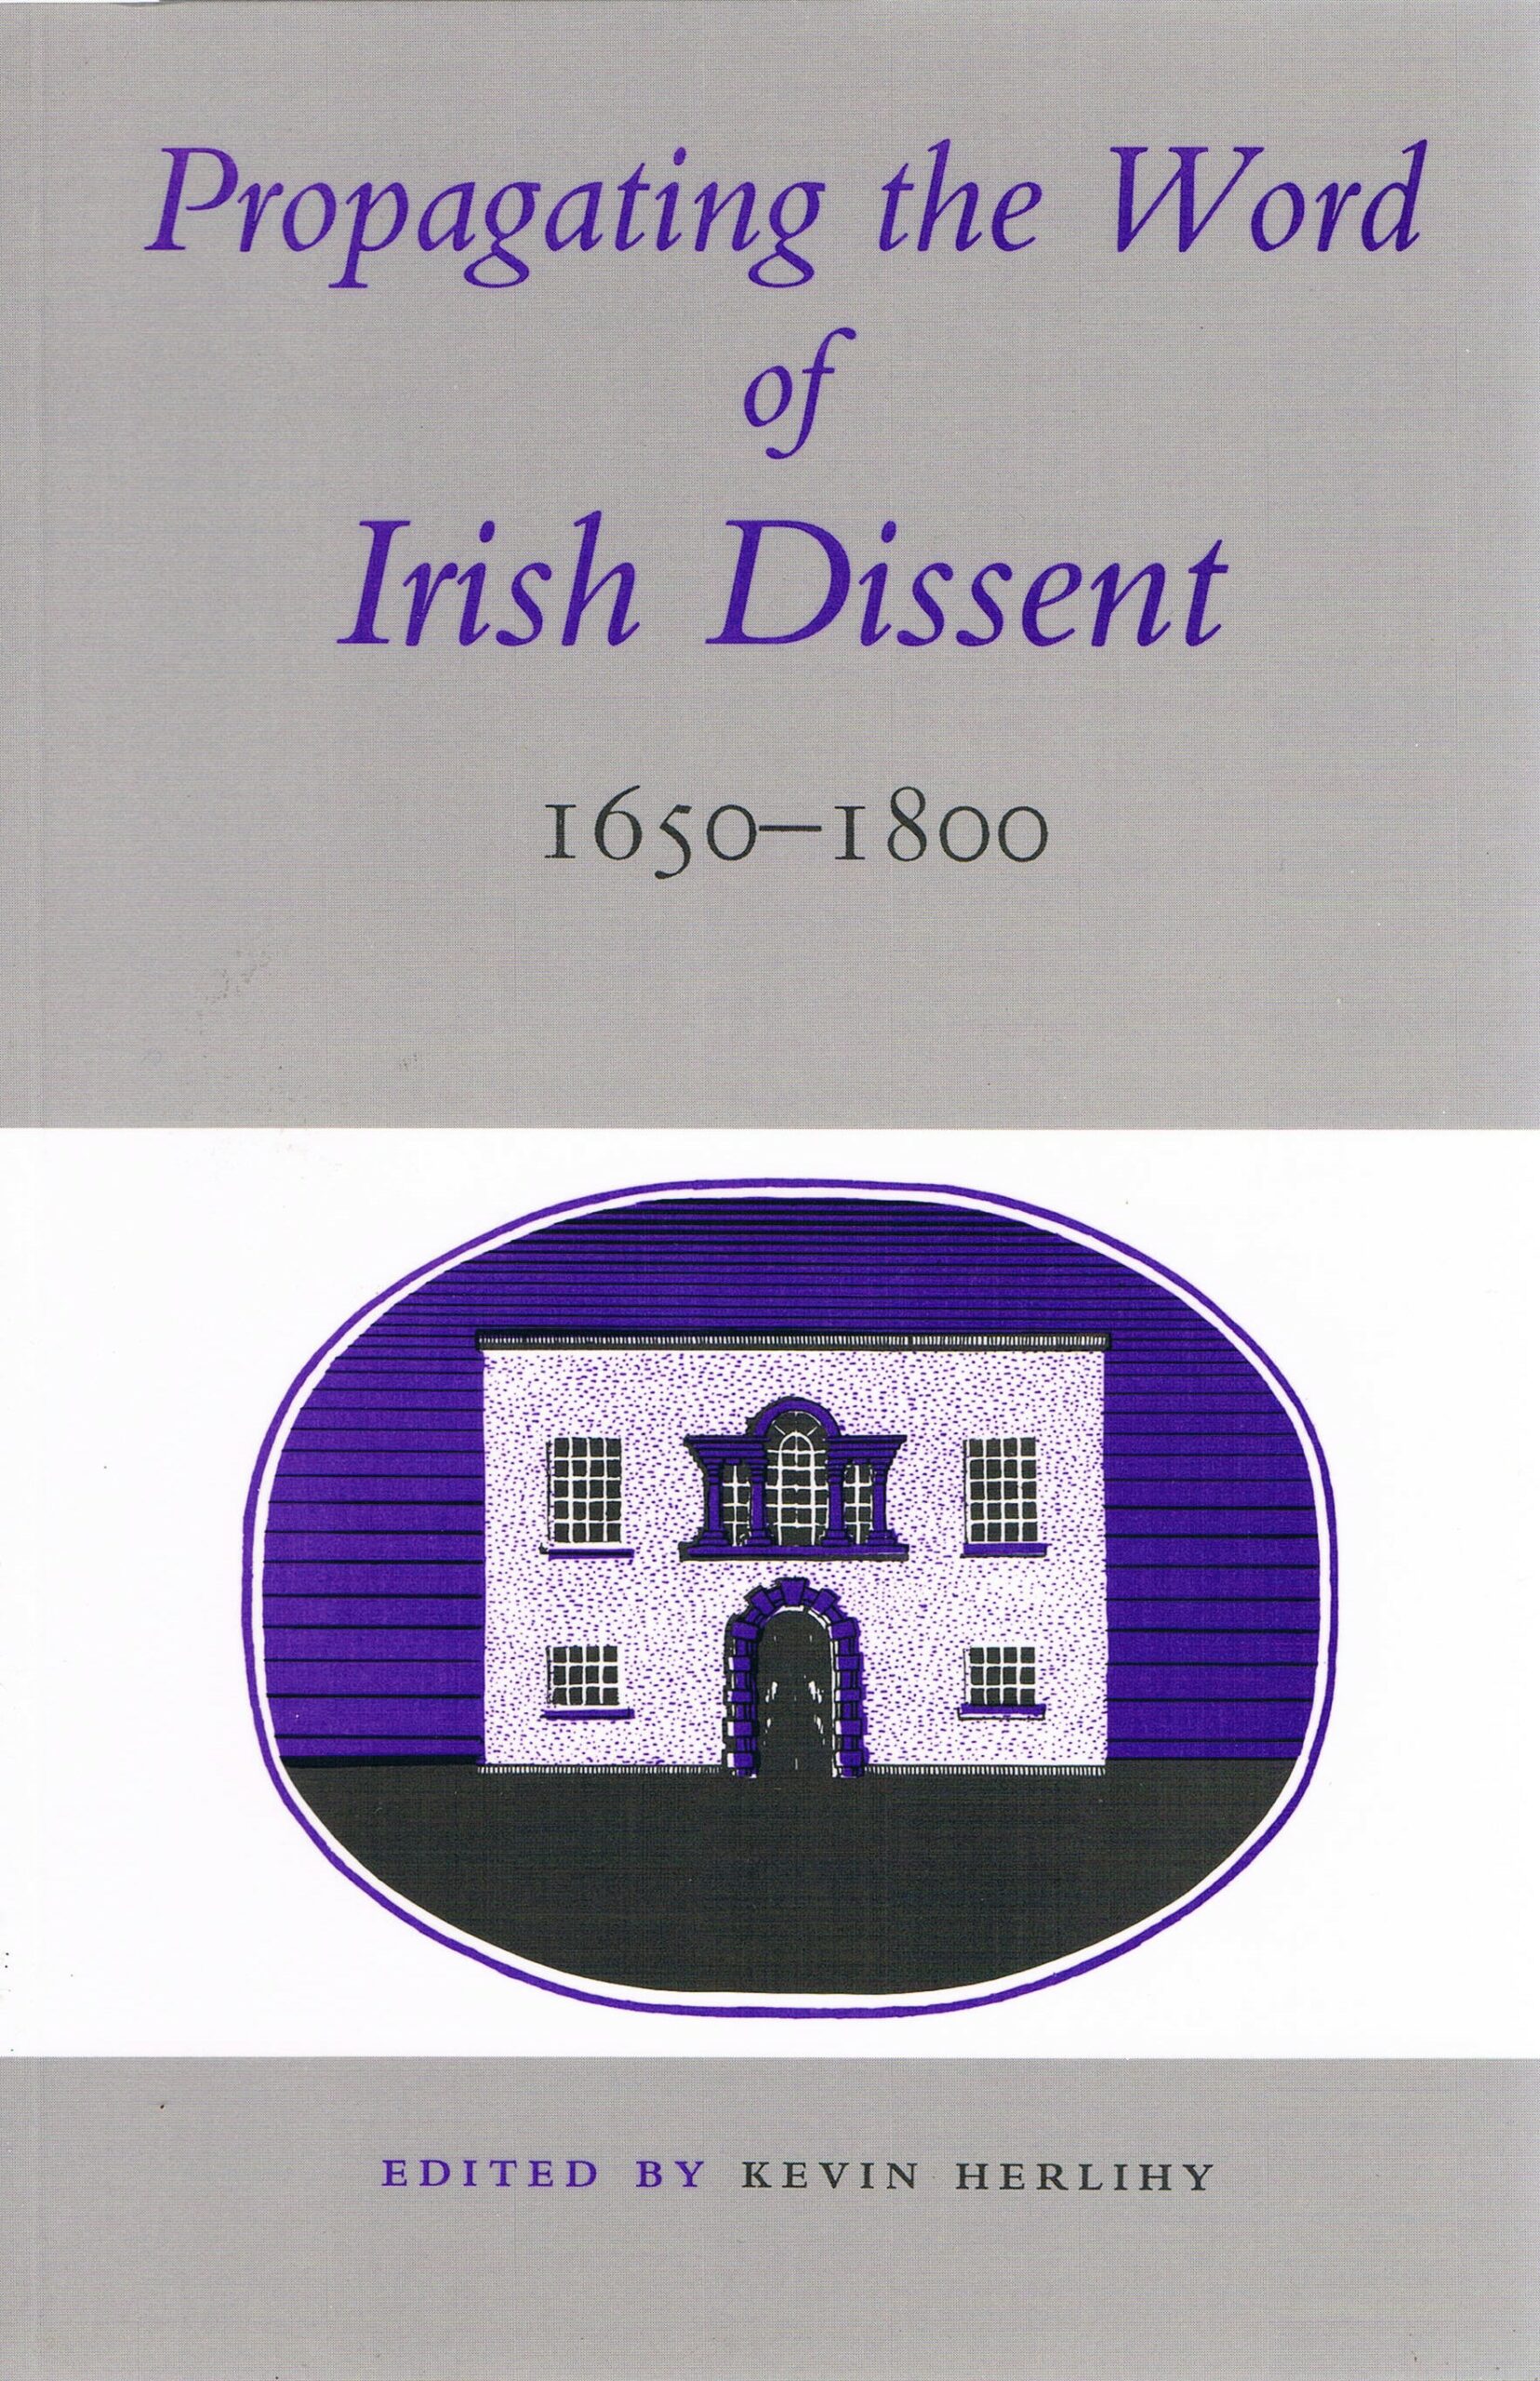 Propagating the Word of Irish Dissent 1650-1800 | Kevin Herlihy | Charlie Byrne's